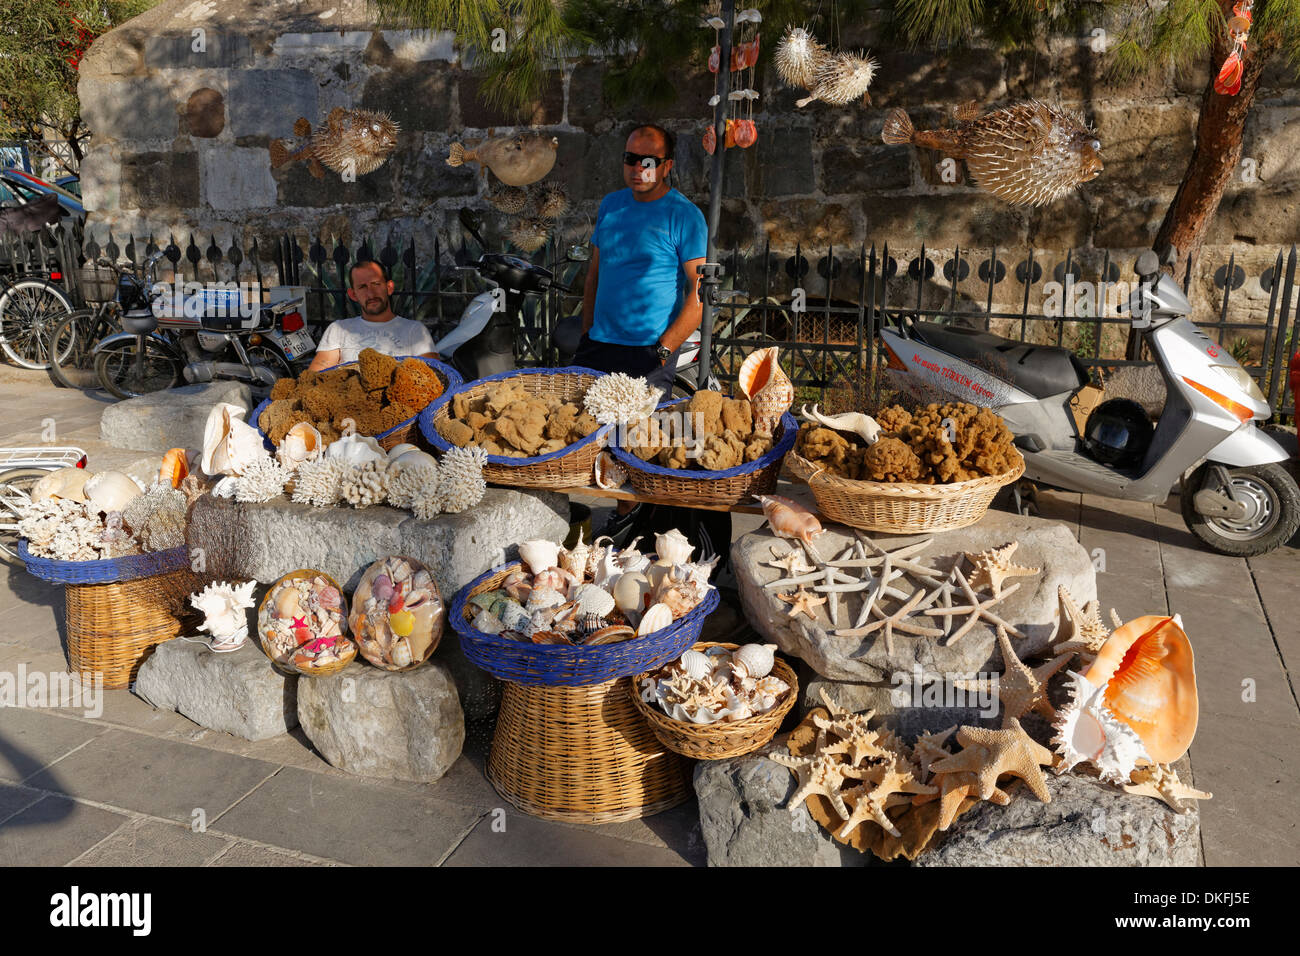 Market stall selling sponges, corals and shells, Bodrum, Muğla Province, Aegean, Turkey Stock Photo